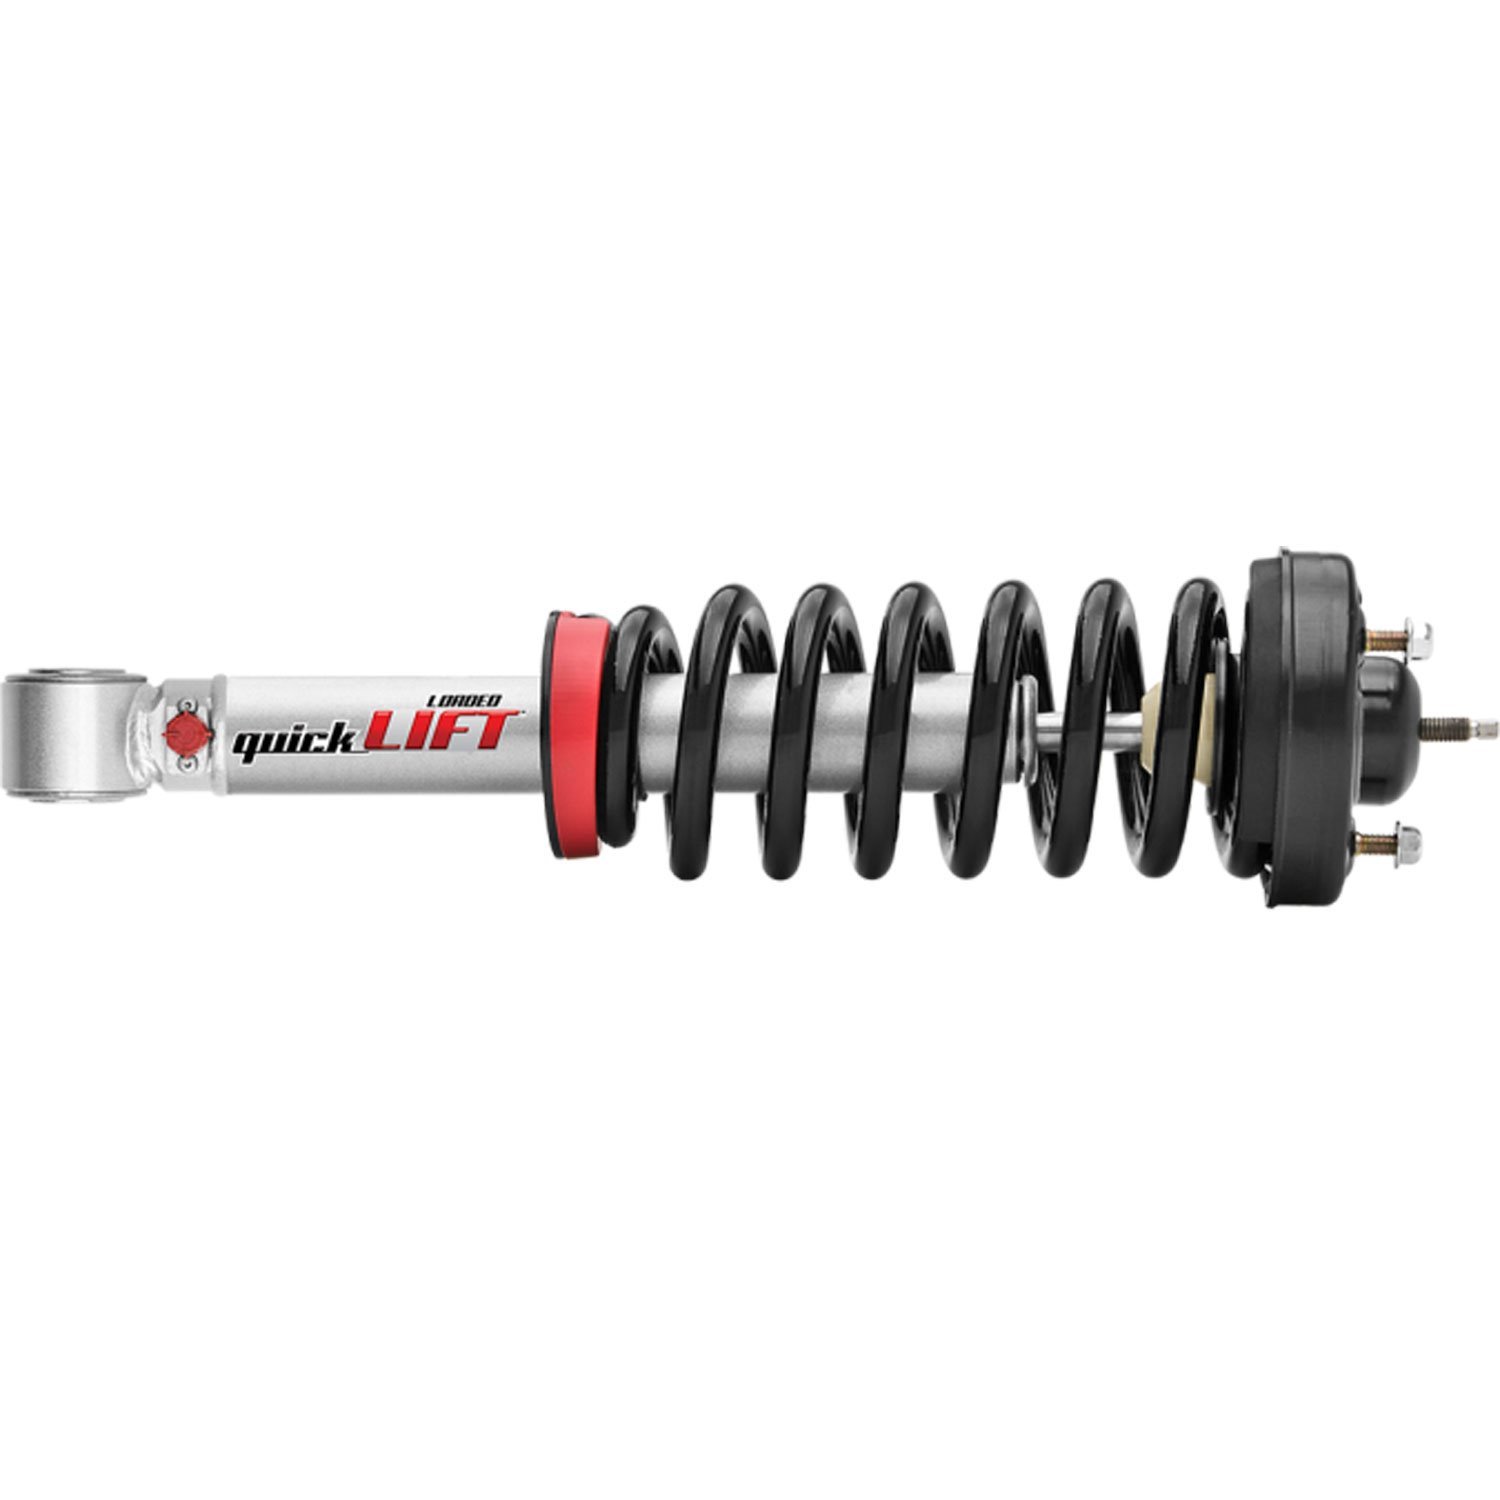 QuickLift Complete Strut Assembly Fits for Nissan Titan